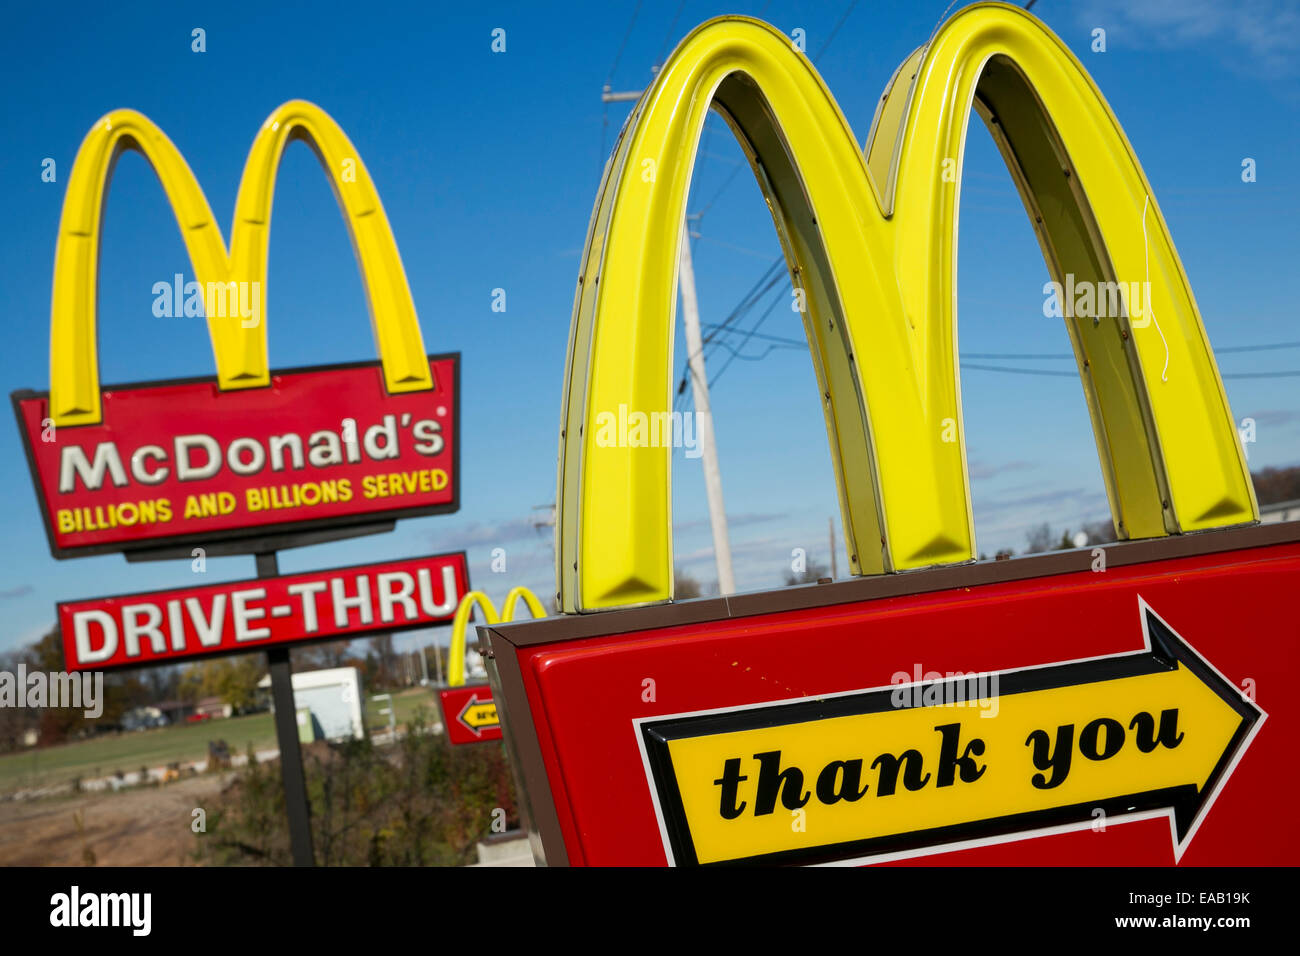 Multiple McDonald's 'Golden Arches' fast food restaurant signs. Stock Photo